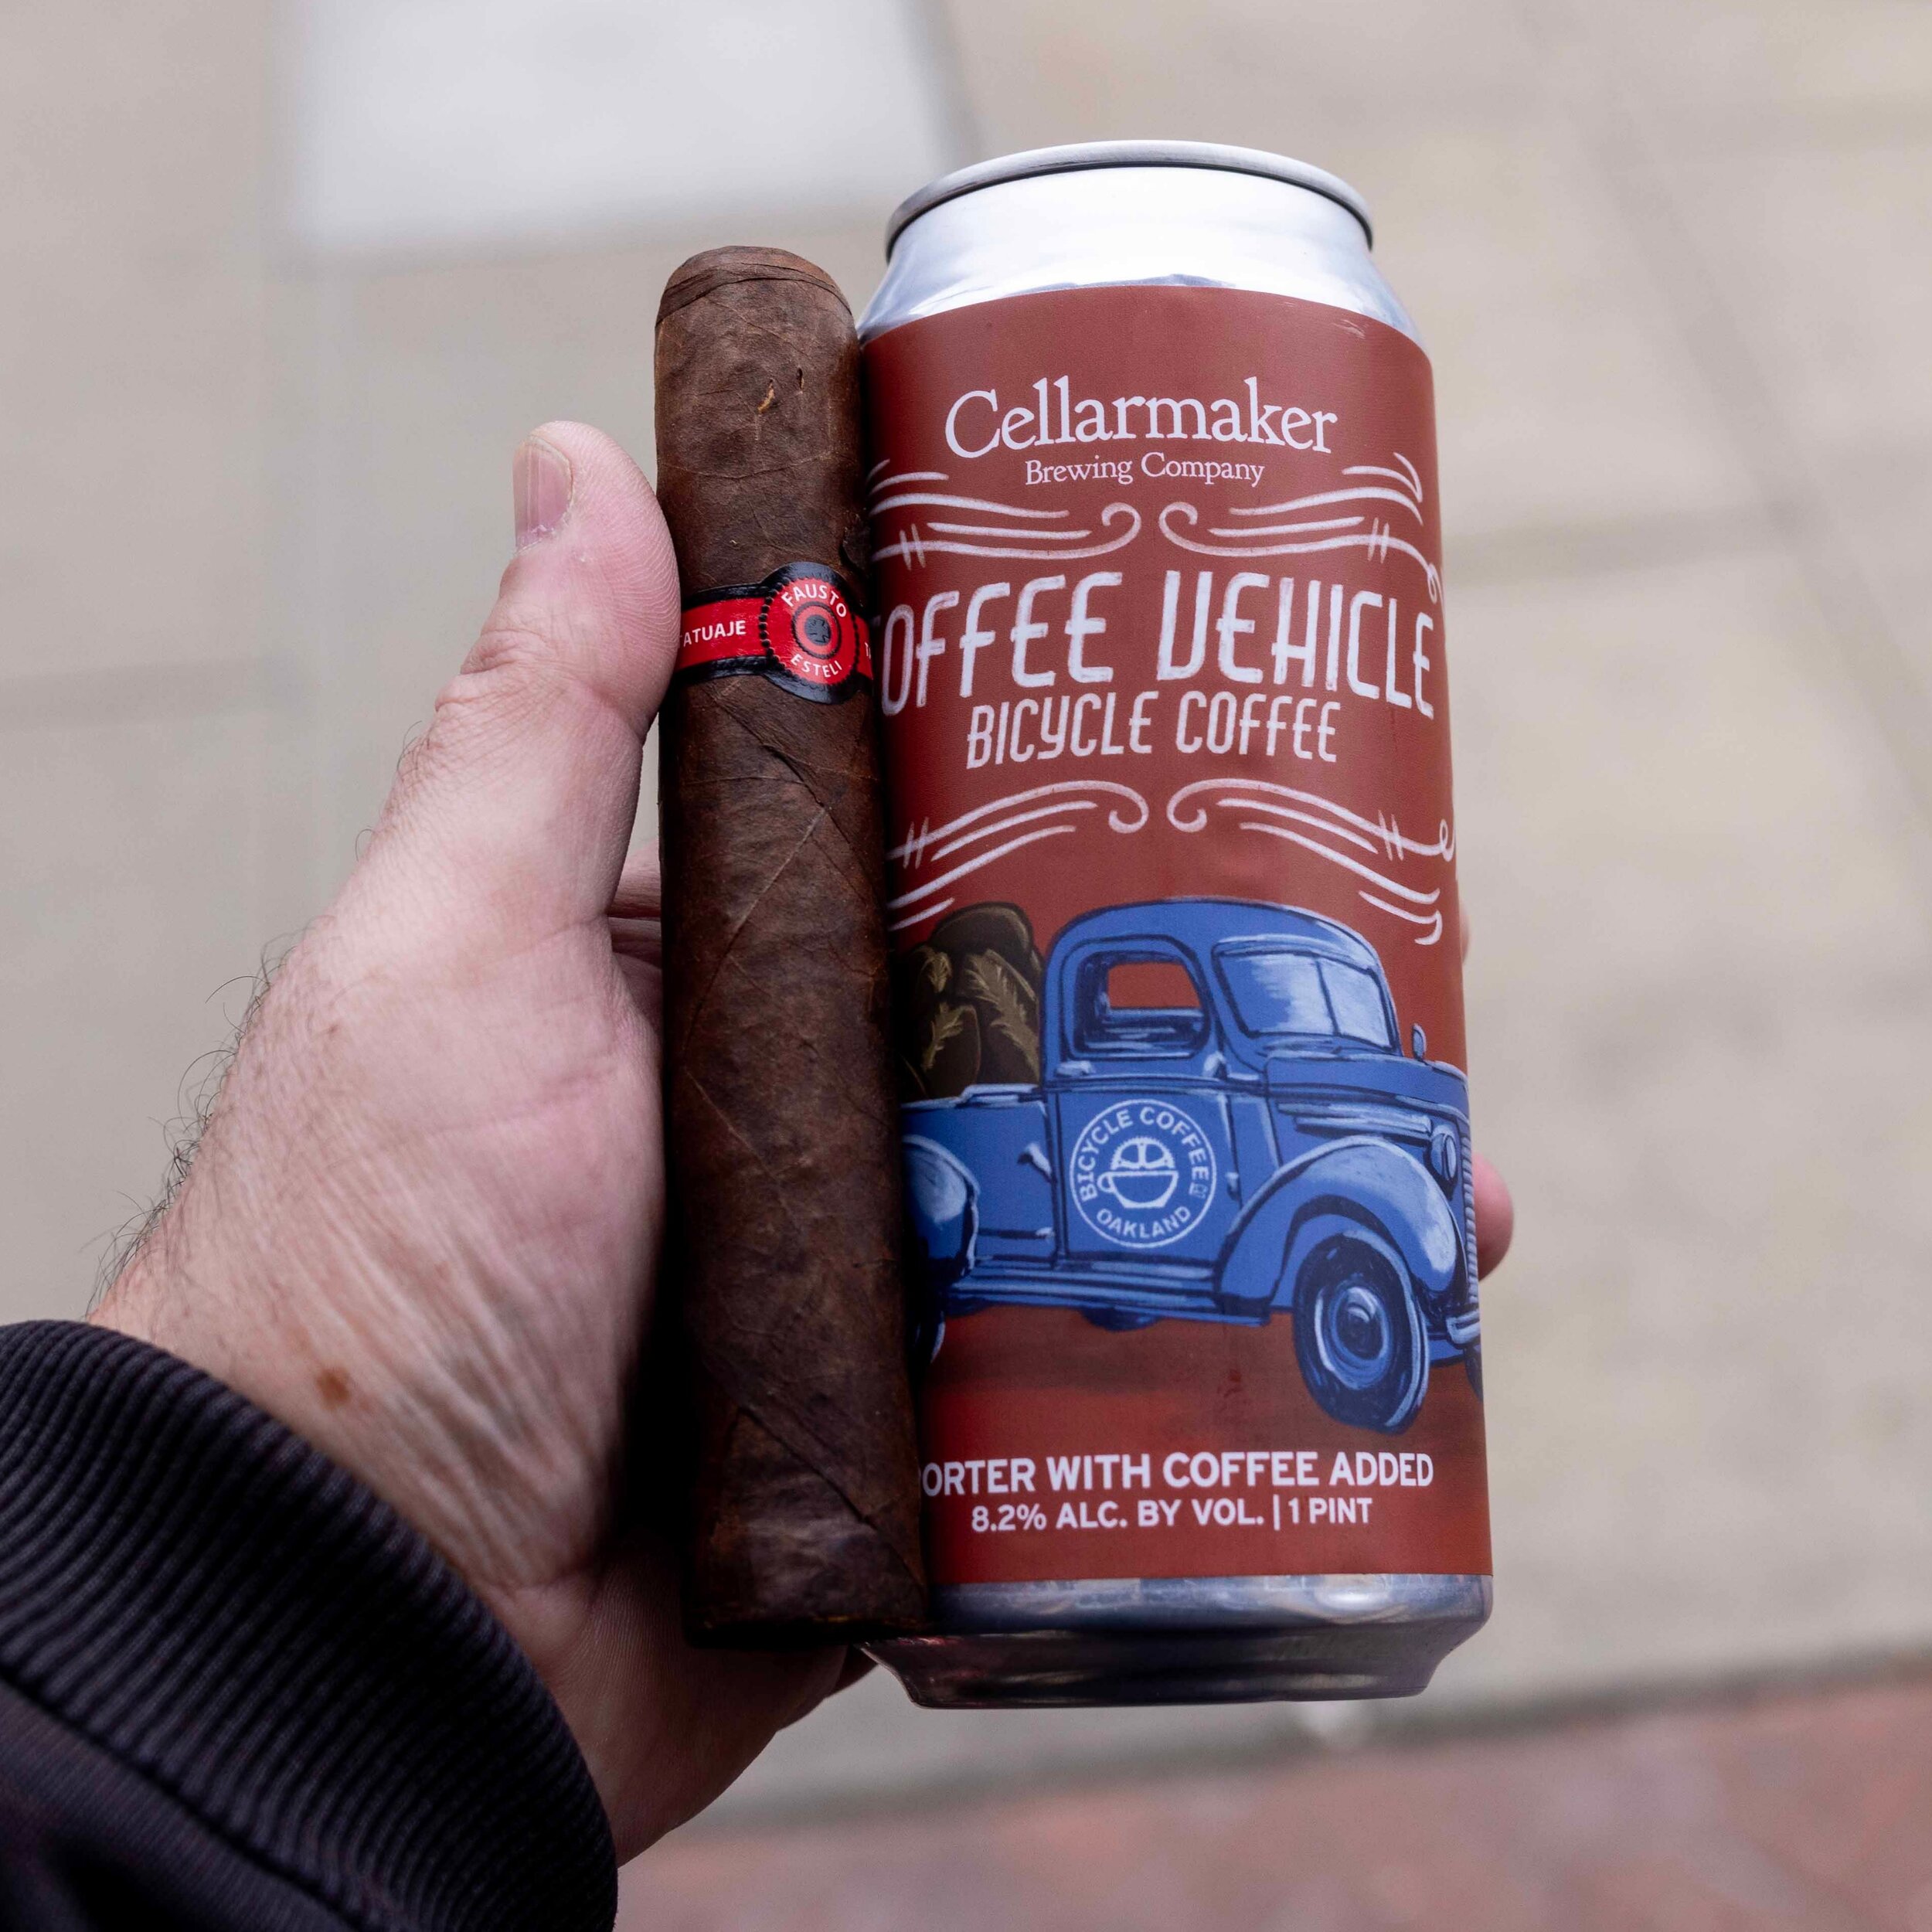 Coffee Vehicle: Bicycle Coffee - The Brew That&rsquo;s Confused About Its Day Job

Cigar:Tatuaje Fausto Toro